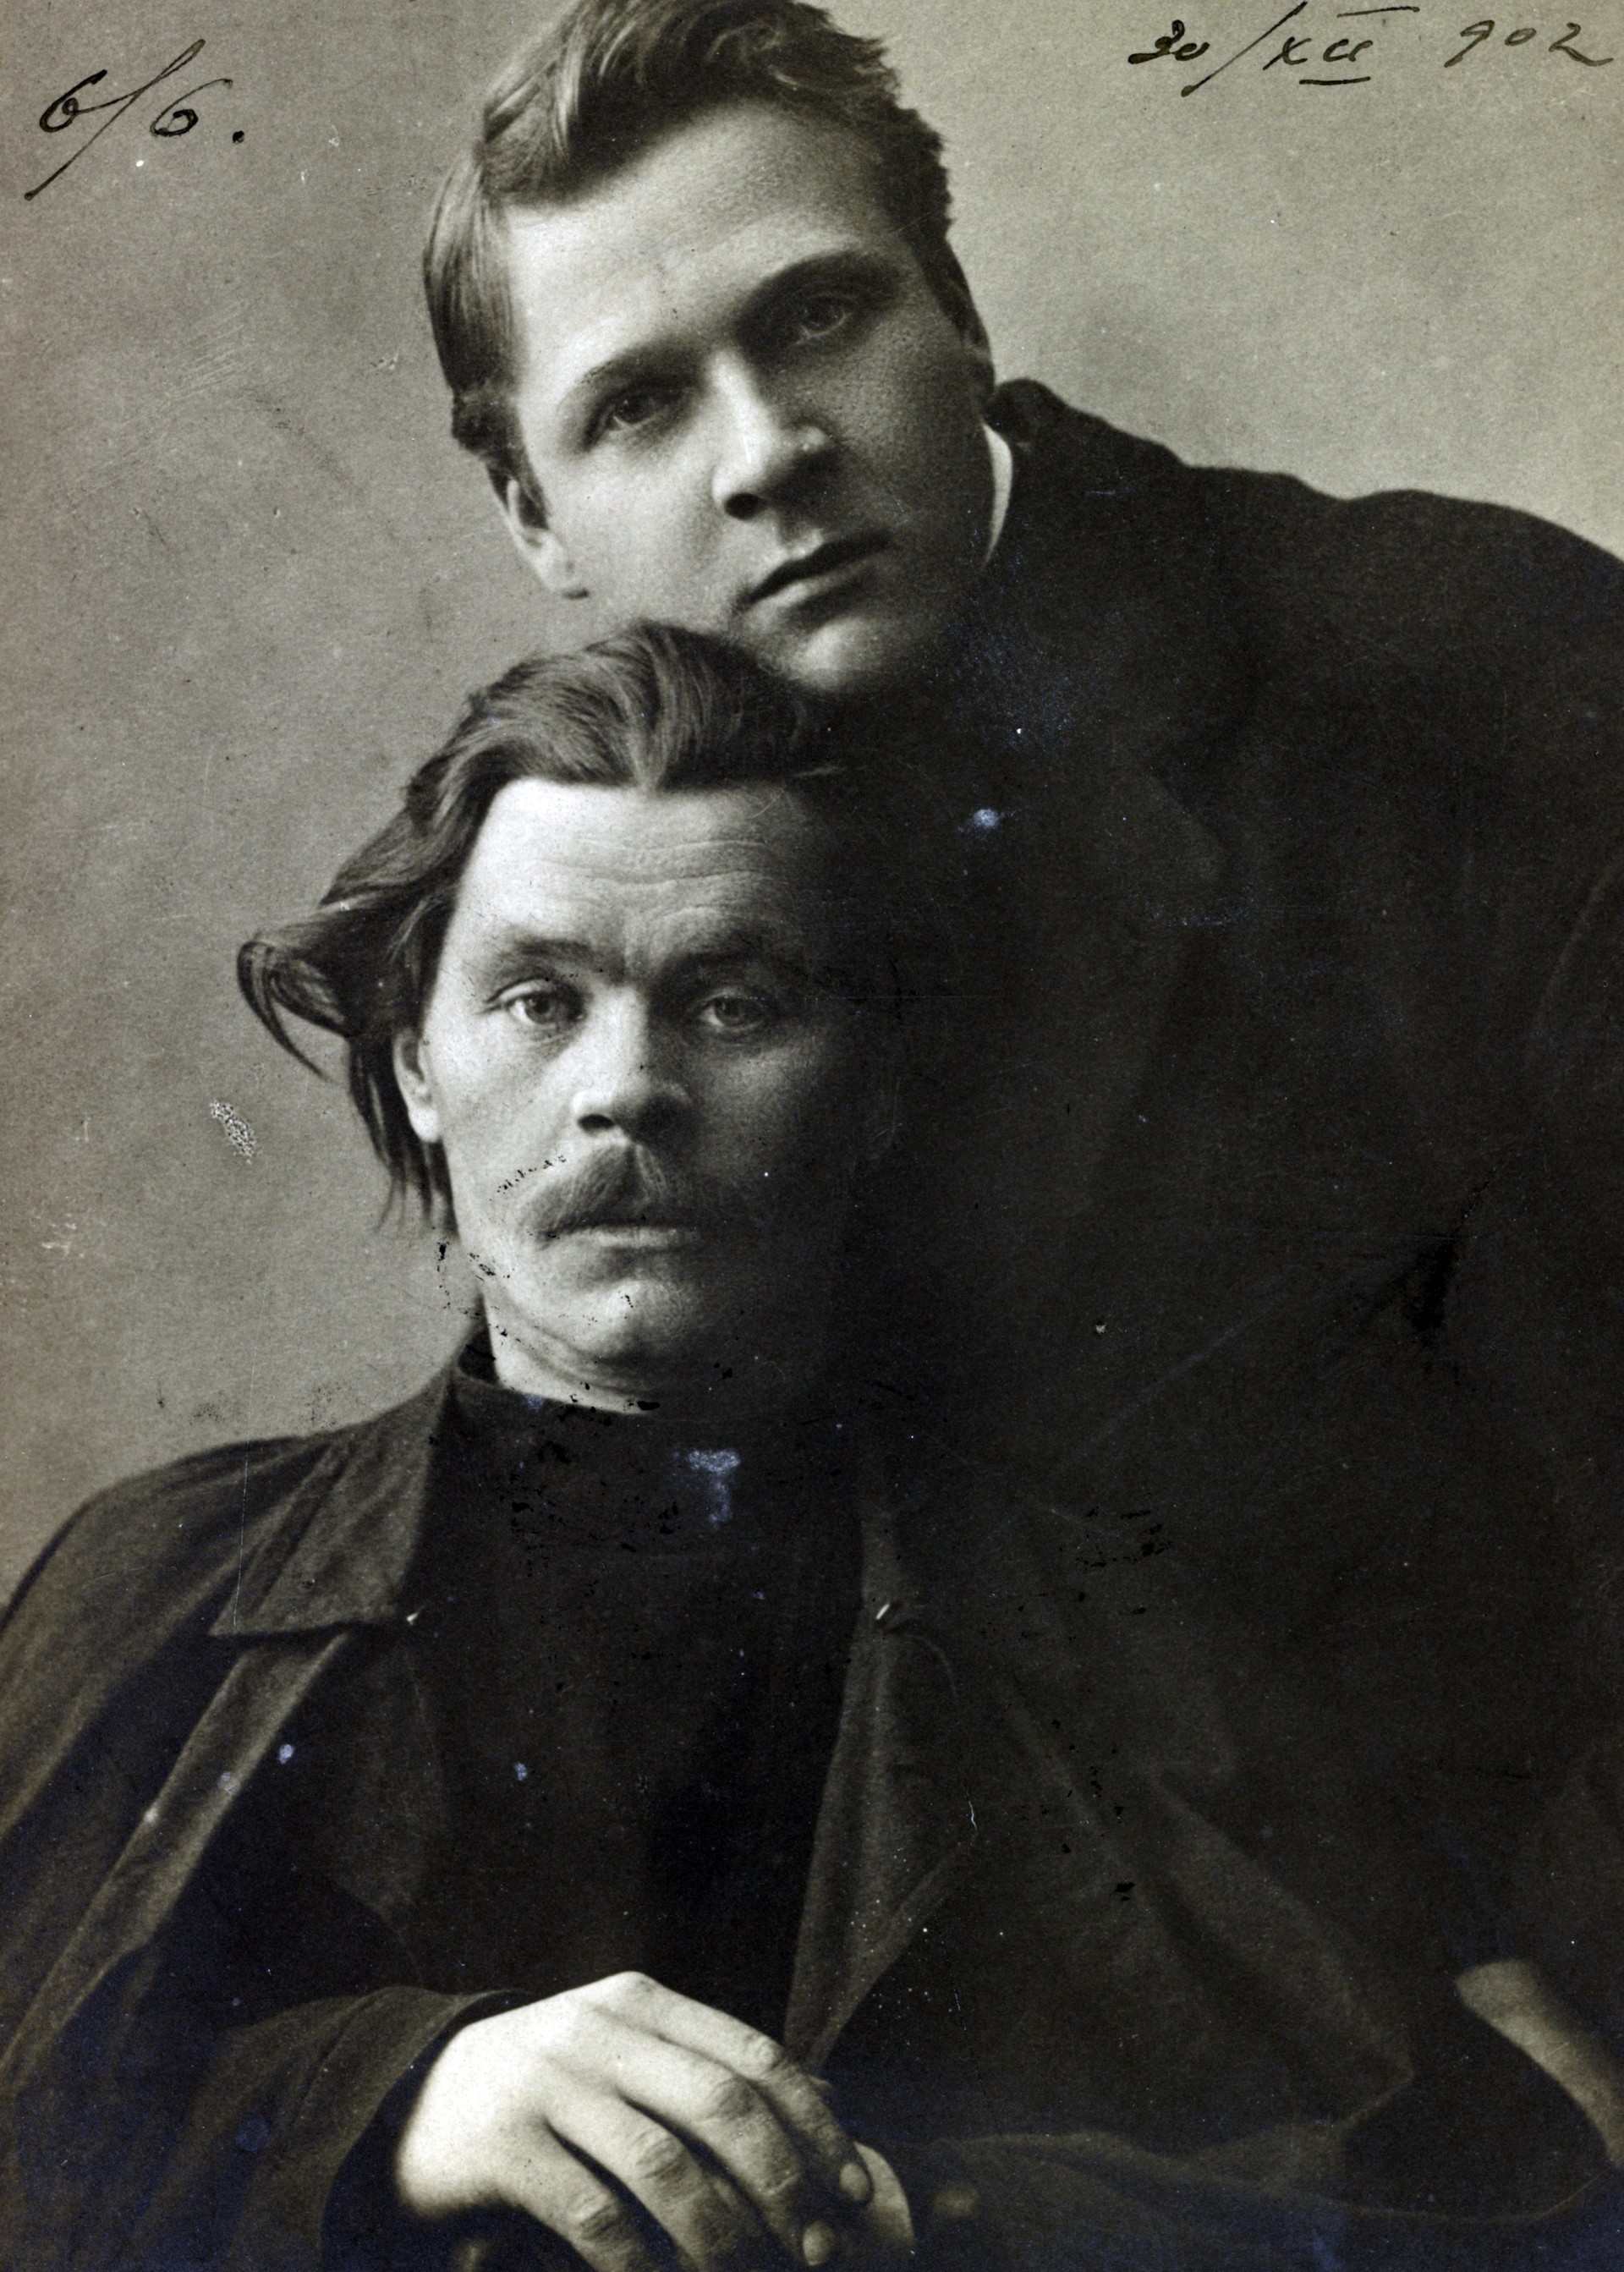 In 1920 Wells met both men that are in that picture from 1901: writer Maxim Gorky (sitting) and singer Feodor Chaliapin